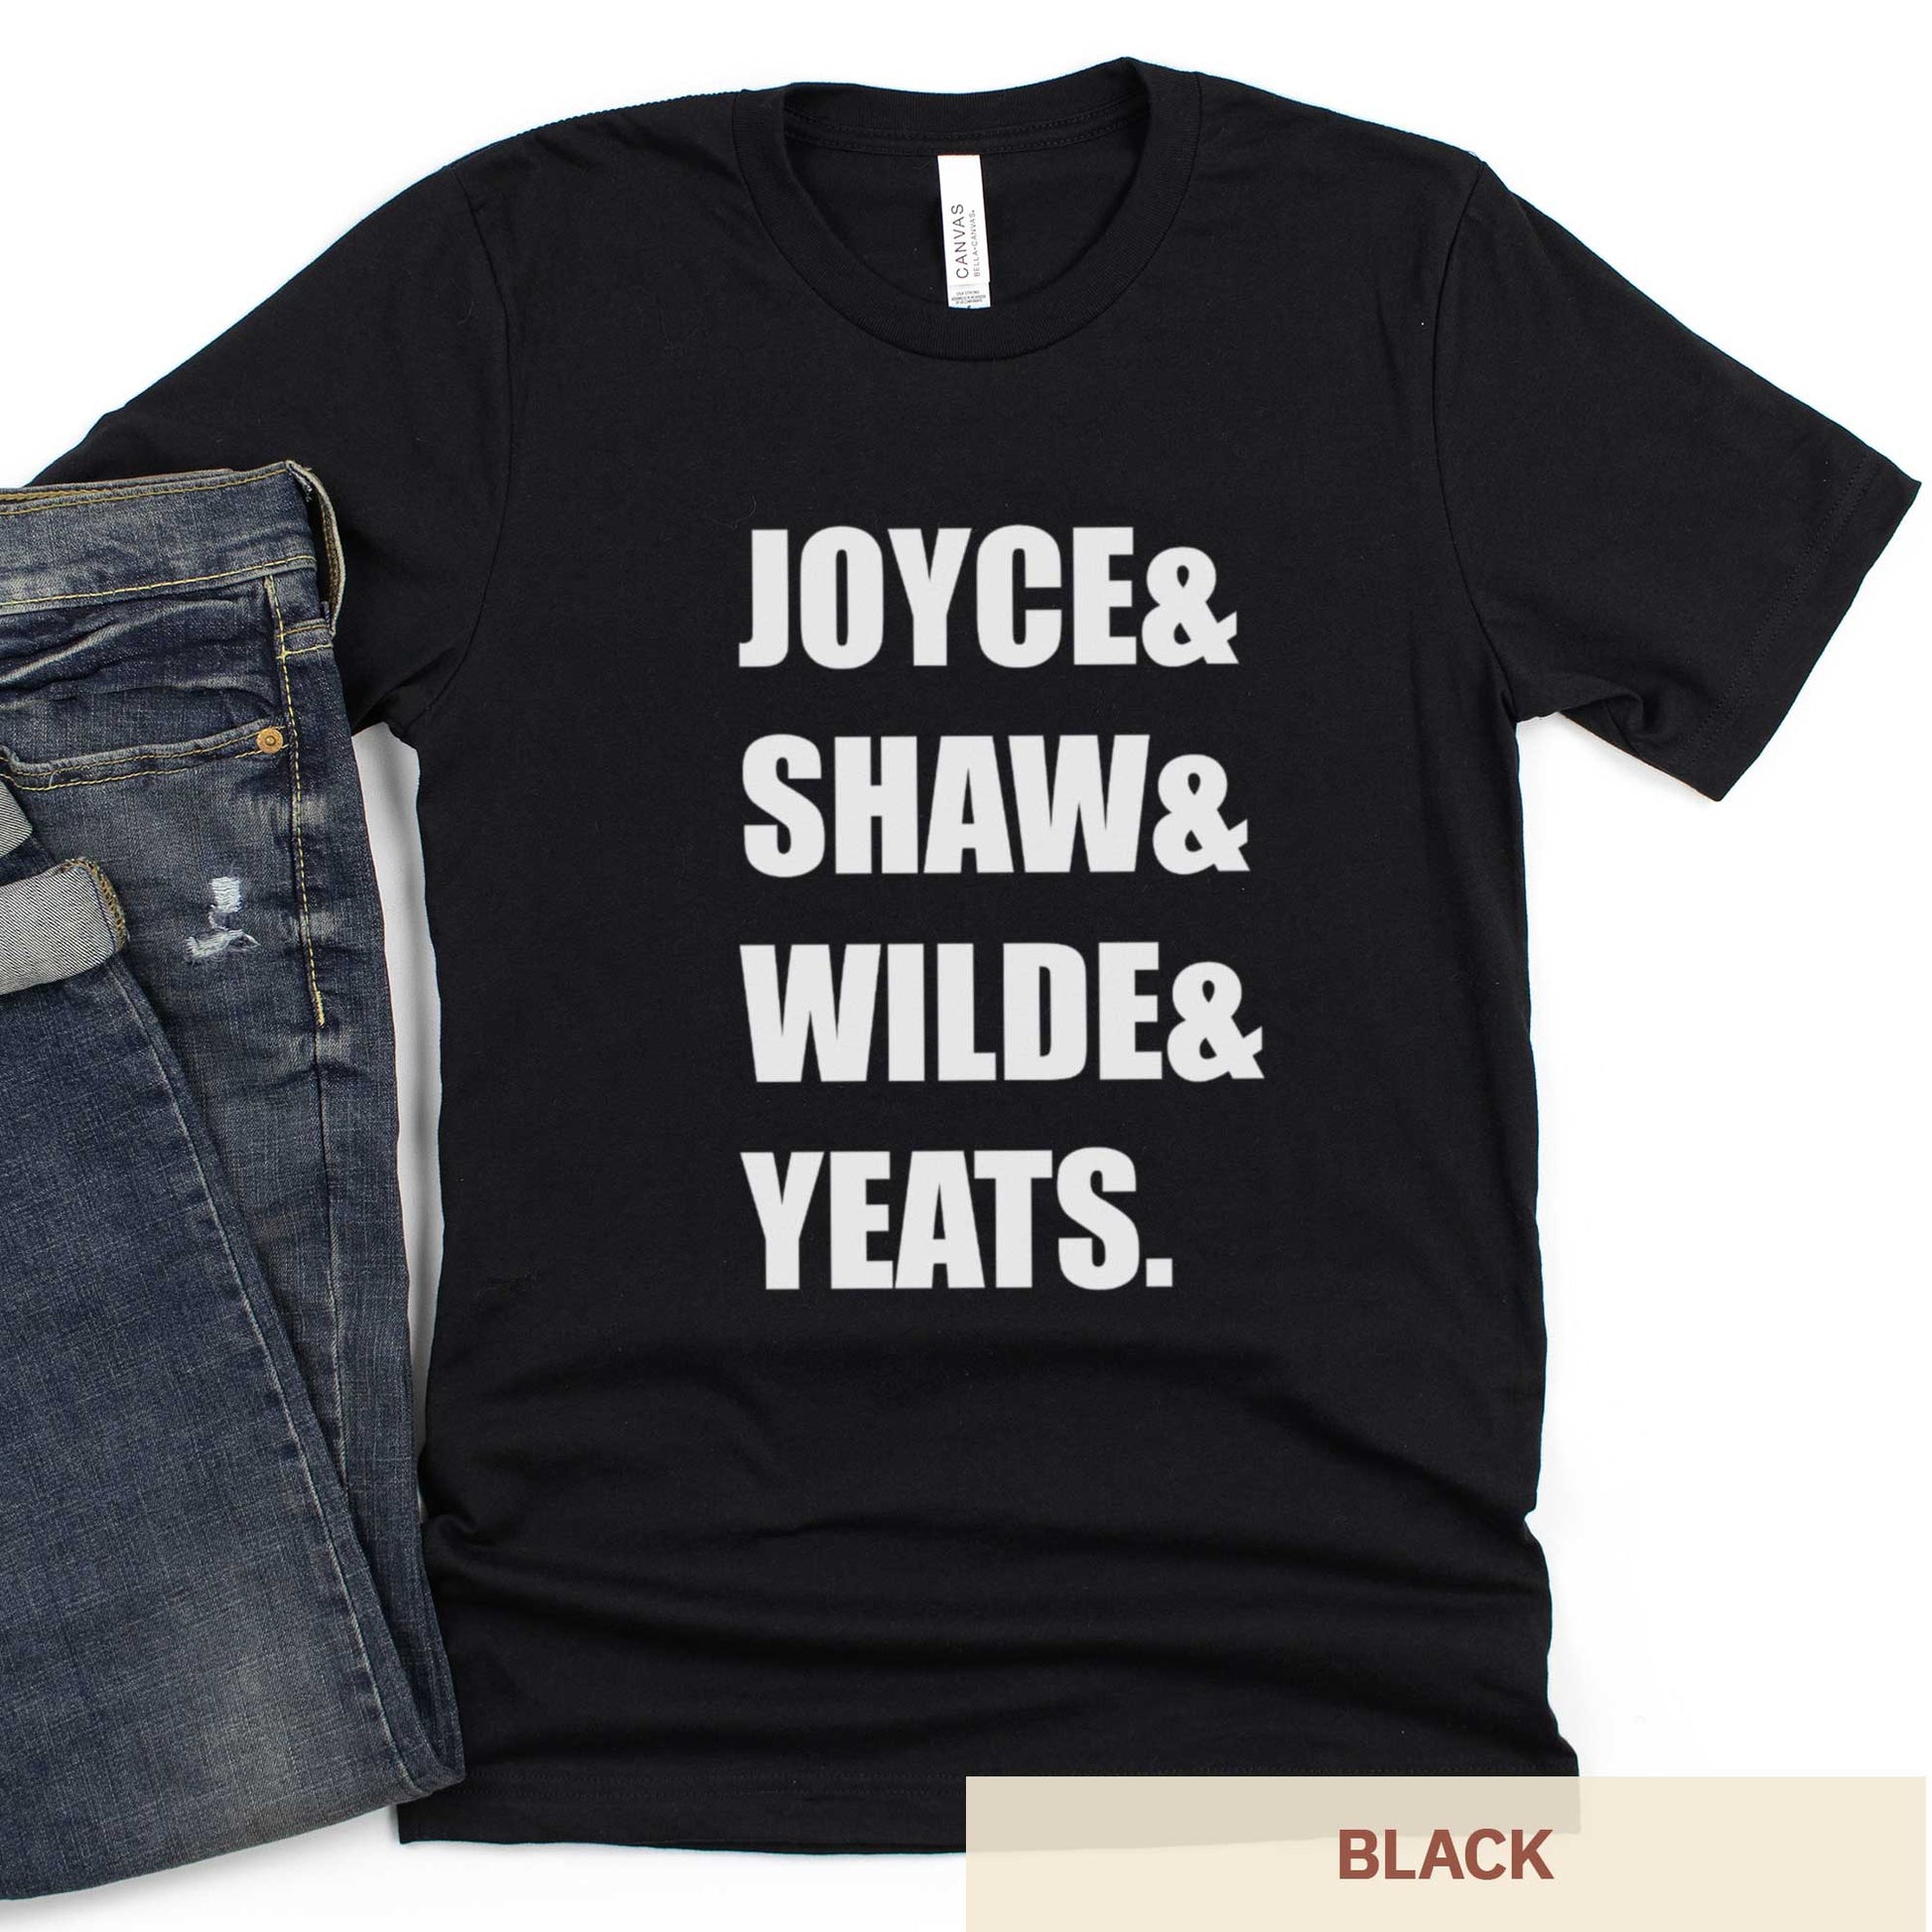 A black Bella Canvas t-shirt featuring the last names of Irish writers Joyce, Shaw, Wilde and Yeats.